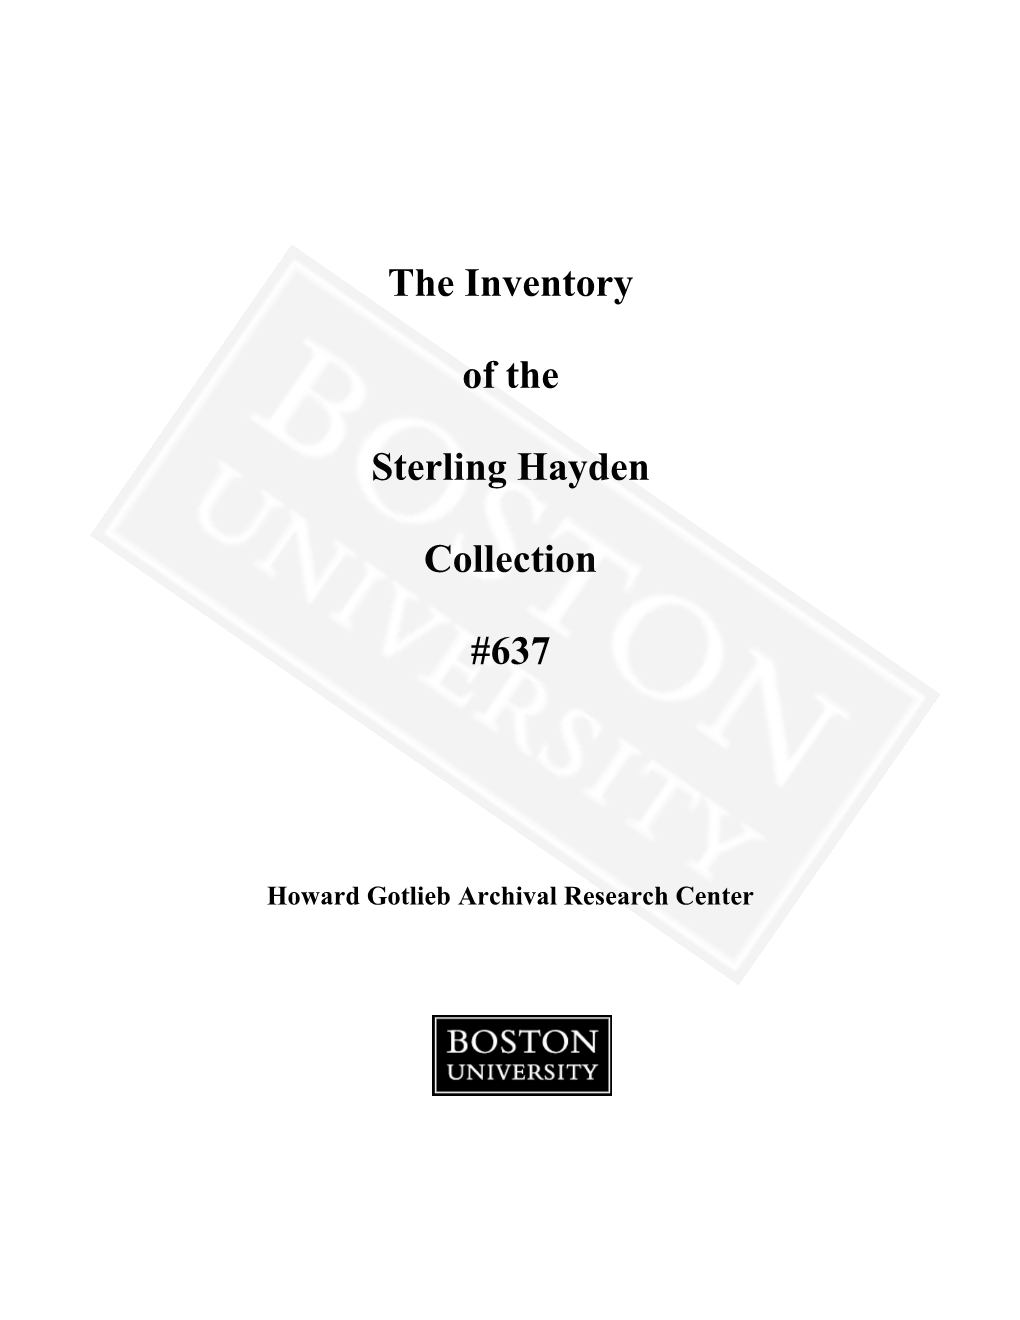 The Inventory of the Sterling Hayden Collection #637